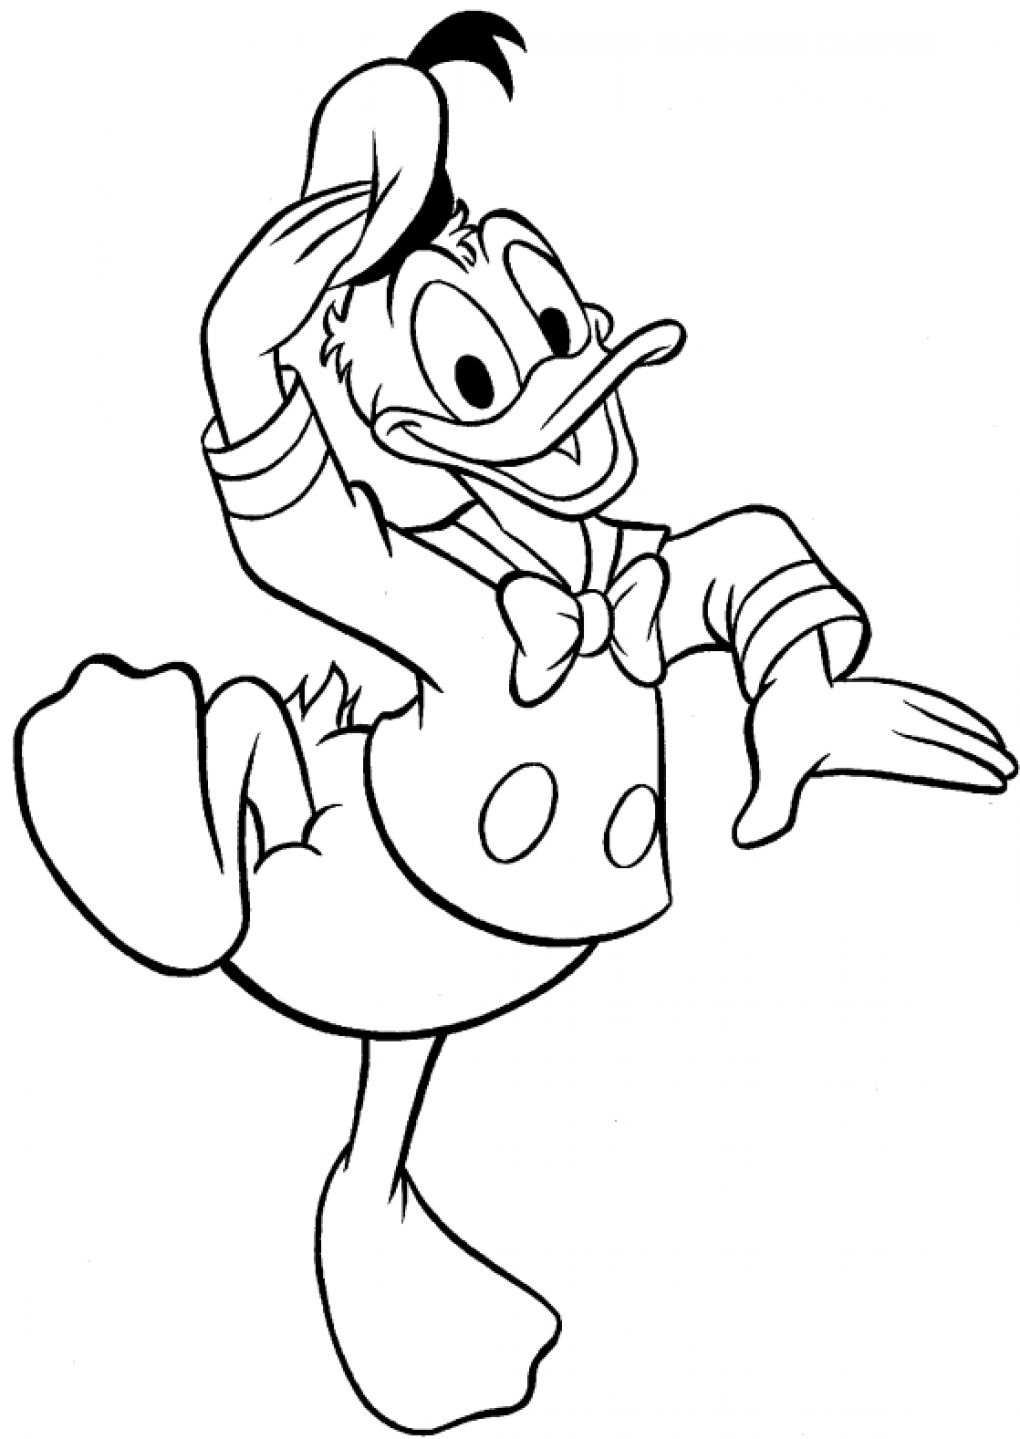 Download Donald Duck Coloring Pages Printable | ColoringMe.com